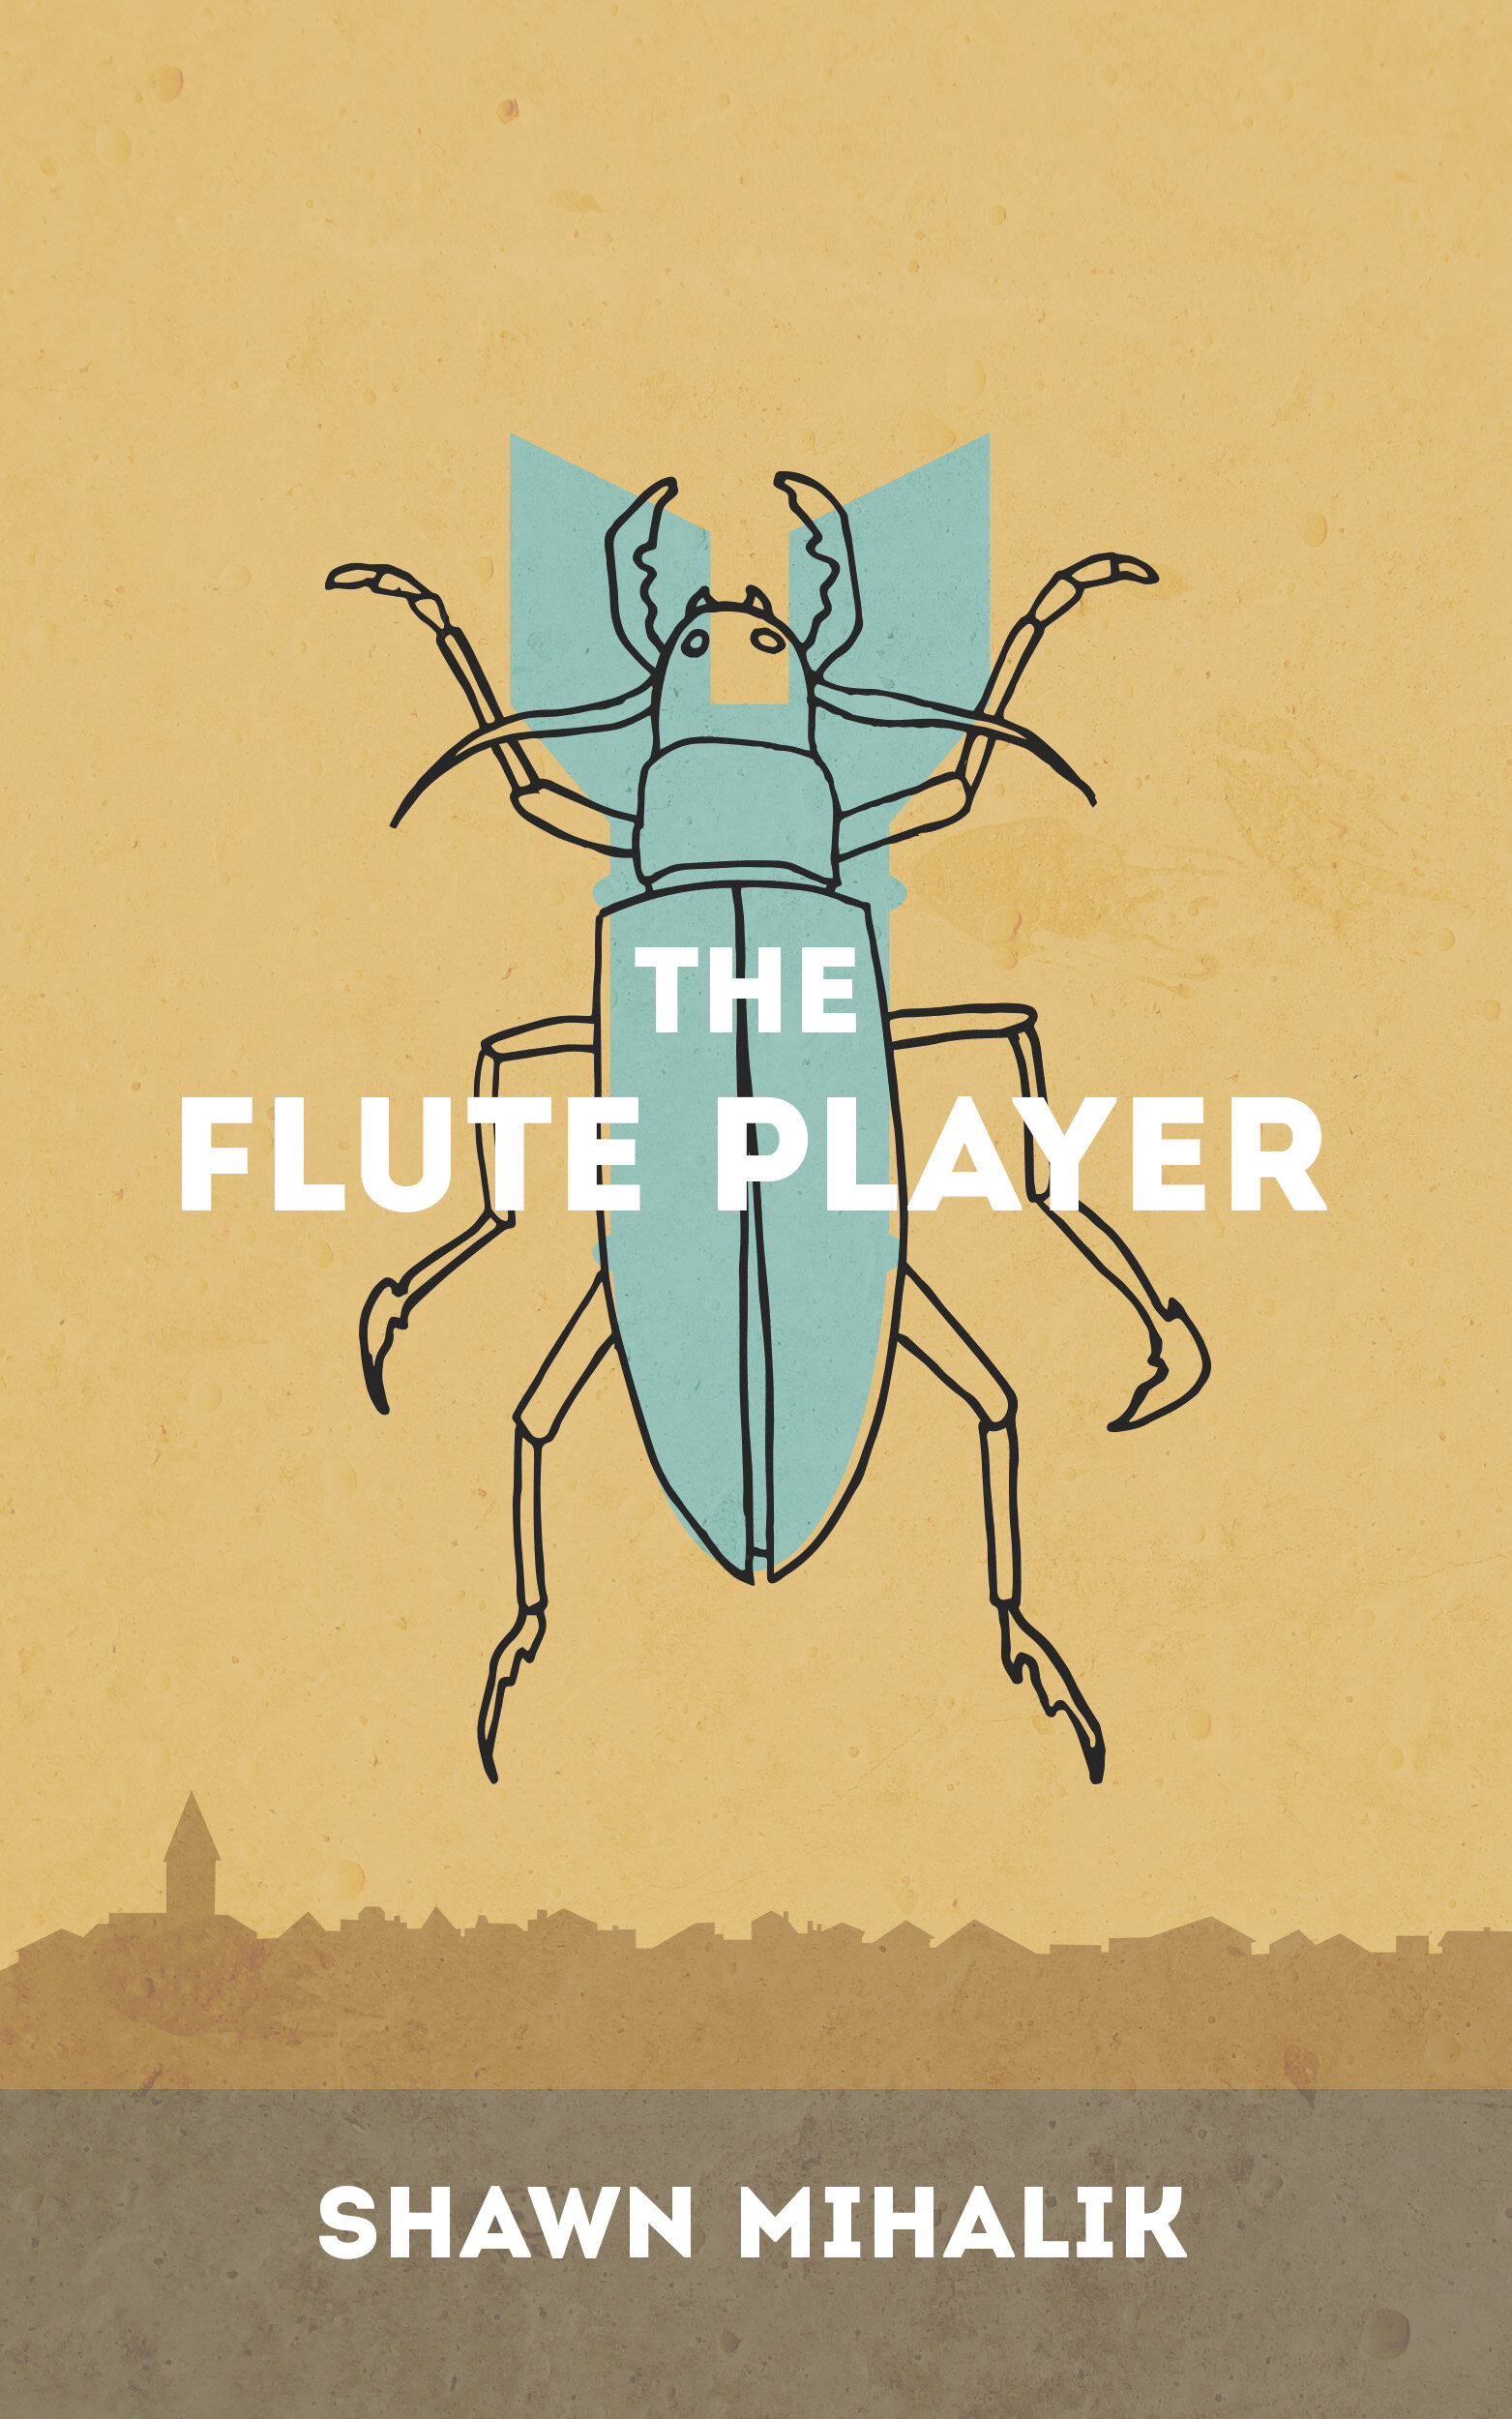   Title:  The Flute Player  Publisher:   Asymmetrical Press   Release Date:  March 9, 2013  Genre:  Novel / Fantasy / Young Adult Fiction  Length:  105 pages   Paperback    Amazon  |  Barnes &amp; Noble  |  Local Bookstore   Ebook   Amazon Kindle   A